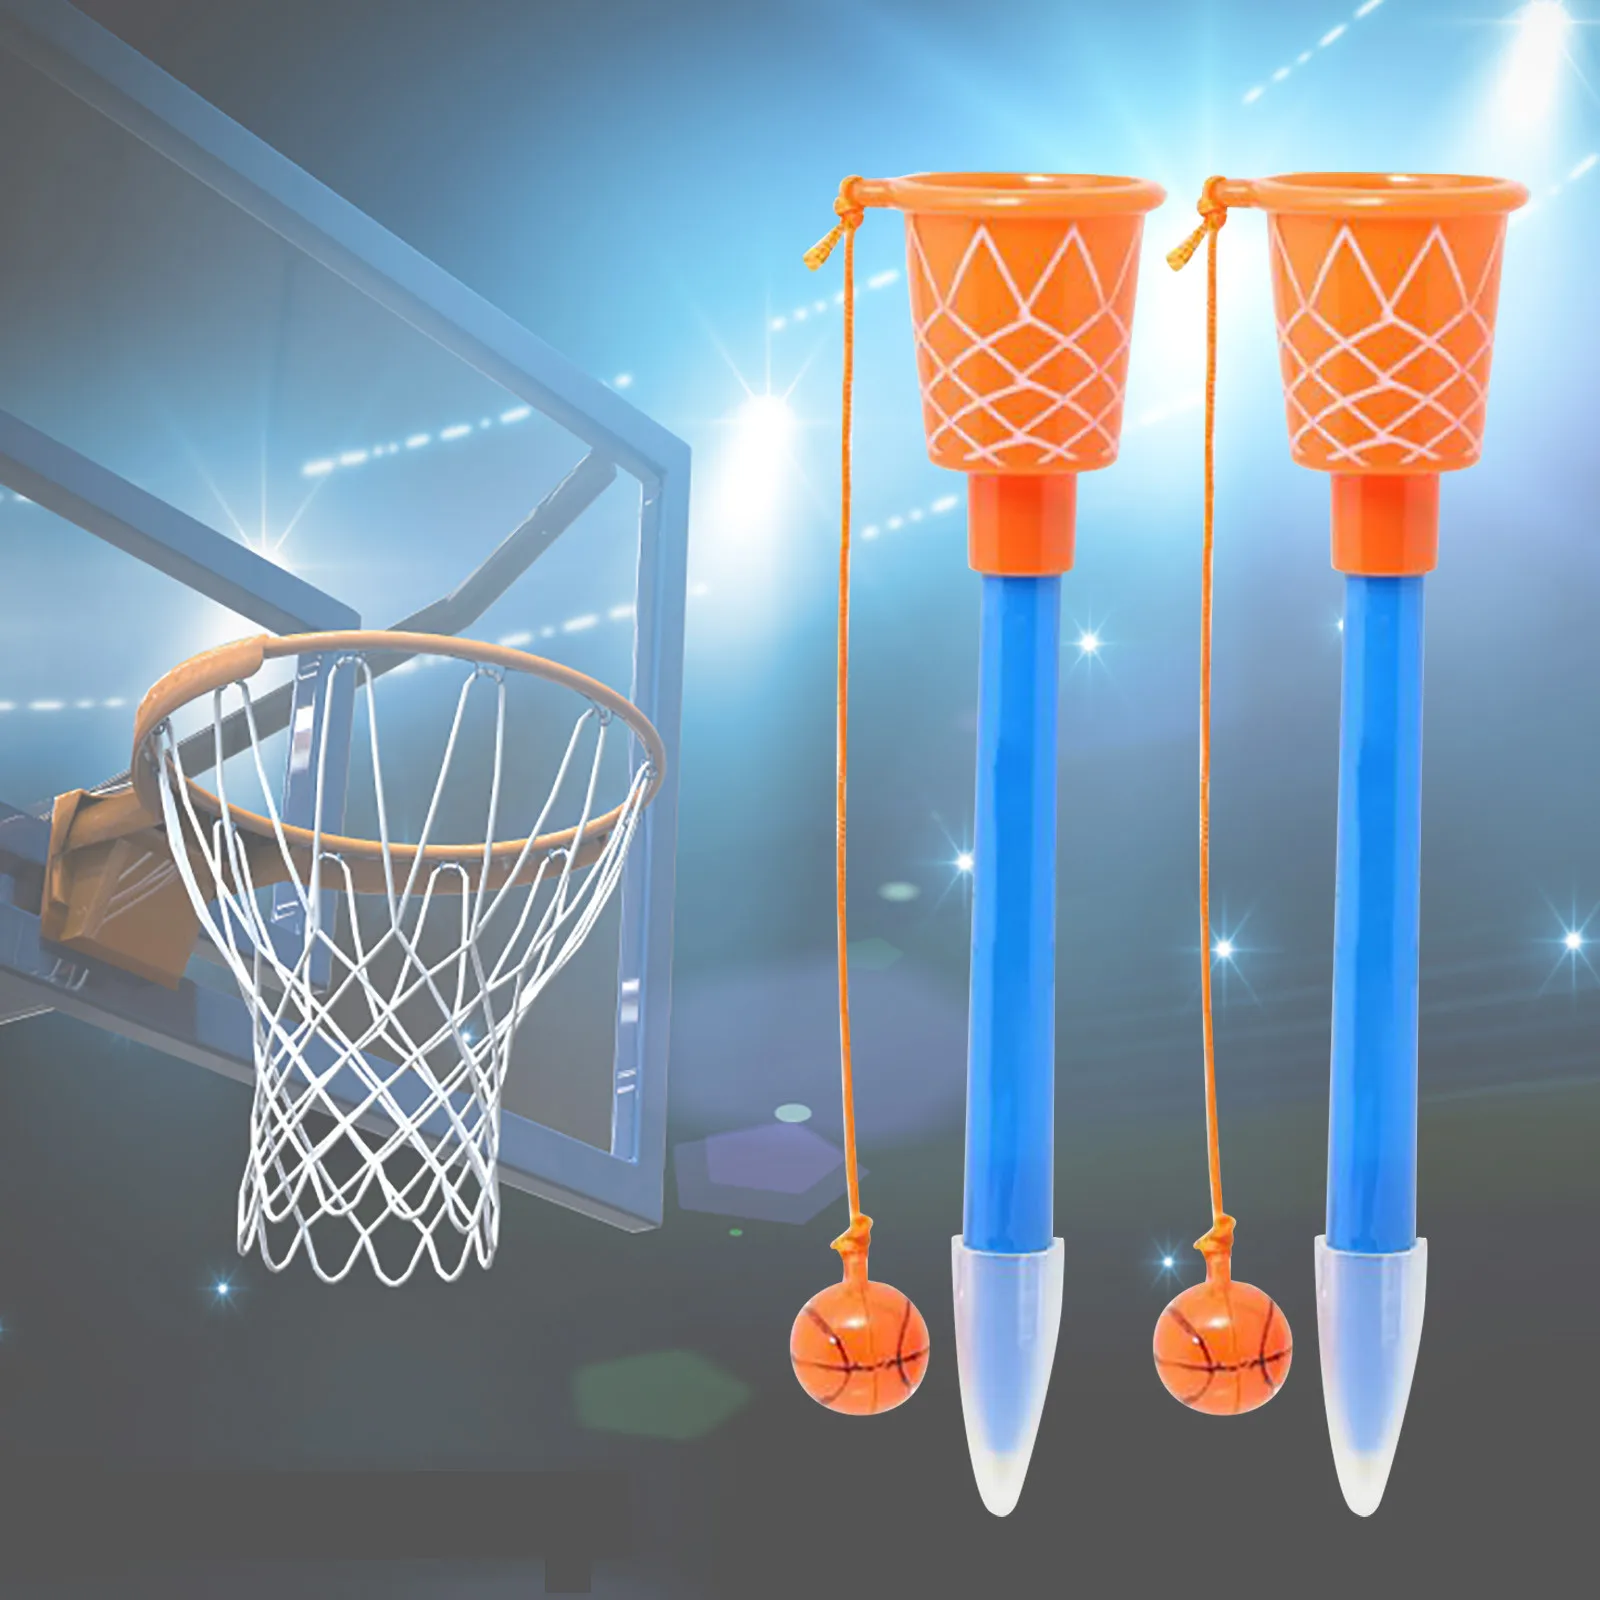 0.7 mm 20 Pcs Basketball Hoop Pens Basketball Party Favors with Blue Pencil Grips Basketball Novelty Pens for Kids Foam Pen Cushion Sports Party Favors for Sports Themed Birthday Party Supplies 